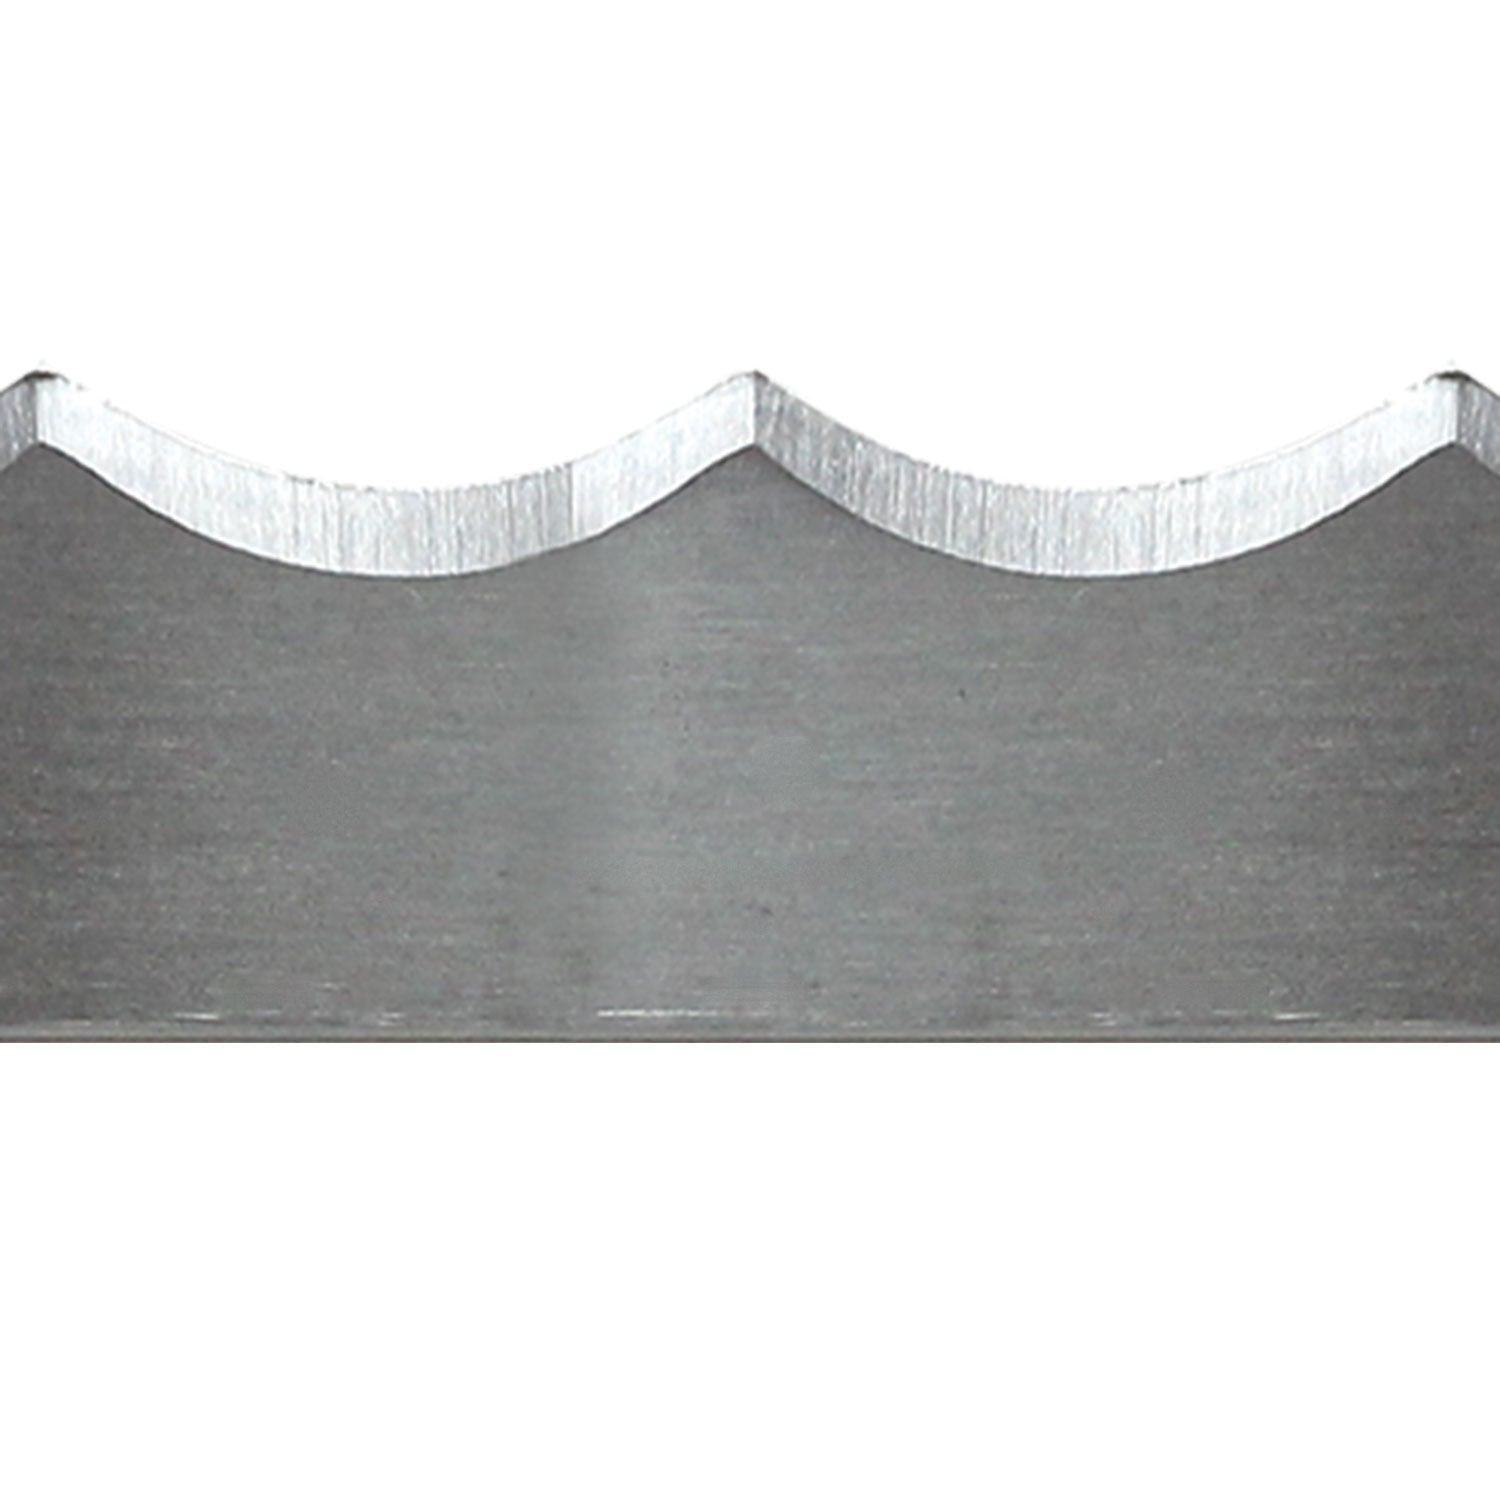 Meat Band Saw Blade - Scallop Edge - Stainless Steel - 124 in. x 5/8 in. x .022 in. - Pack of 4